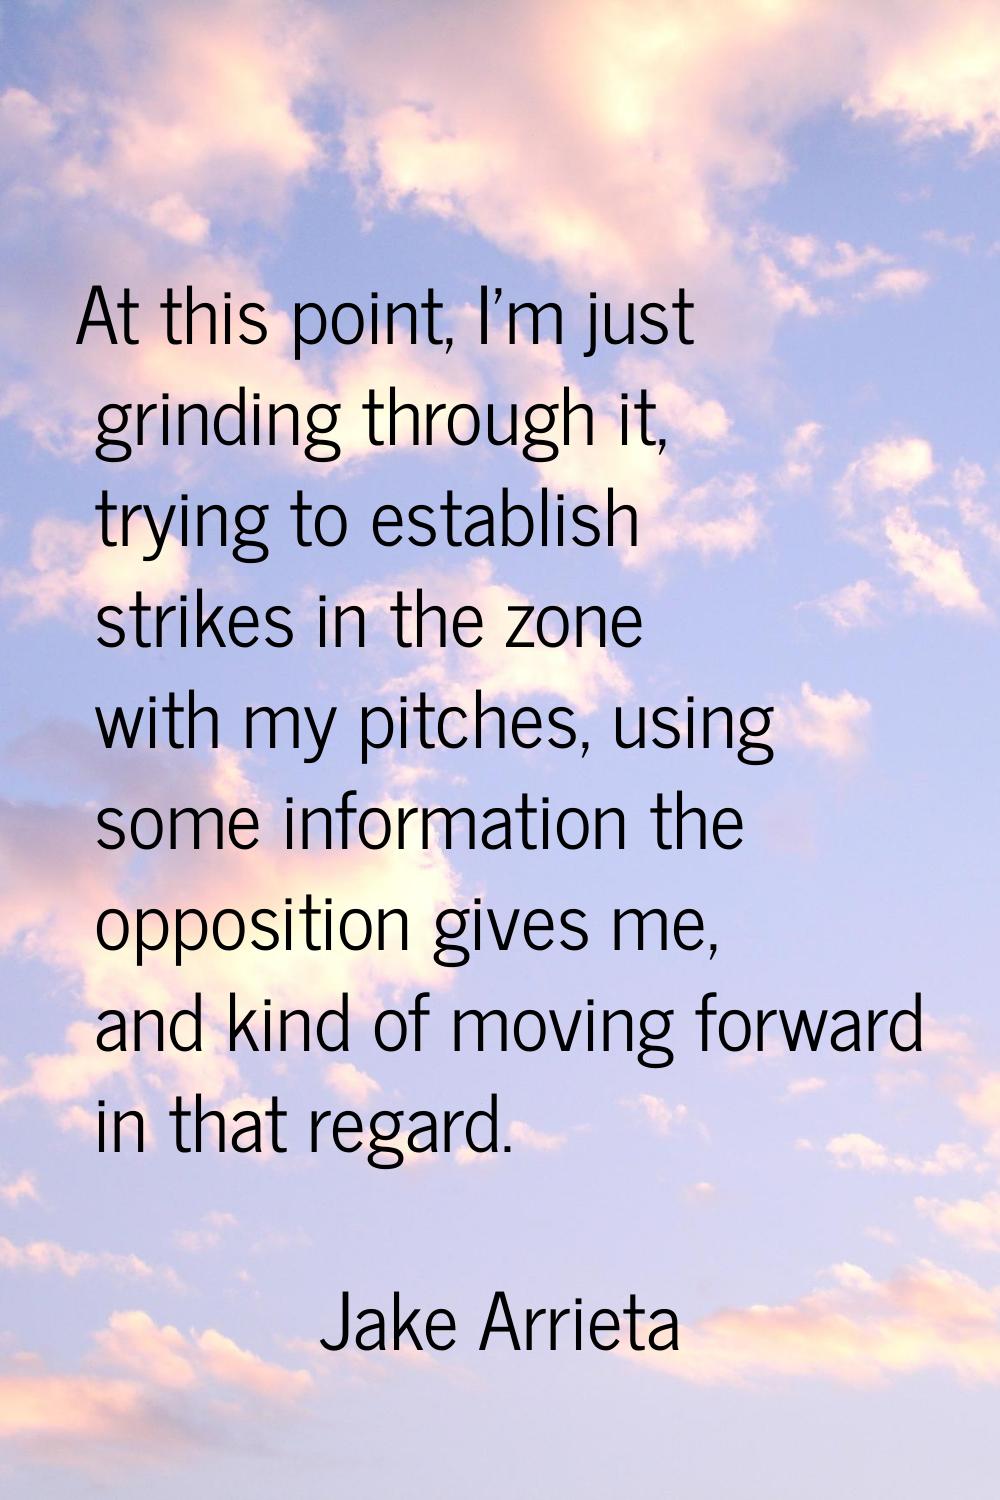 At this point, I'm just grinding through it, trying to establish strikes in the zone with my pitche